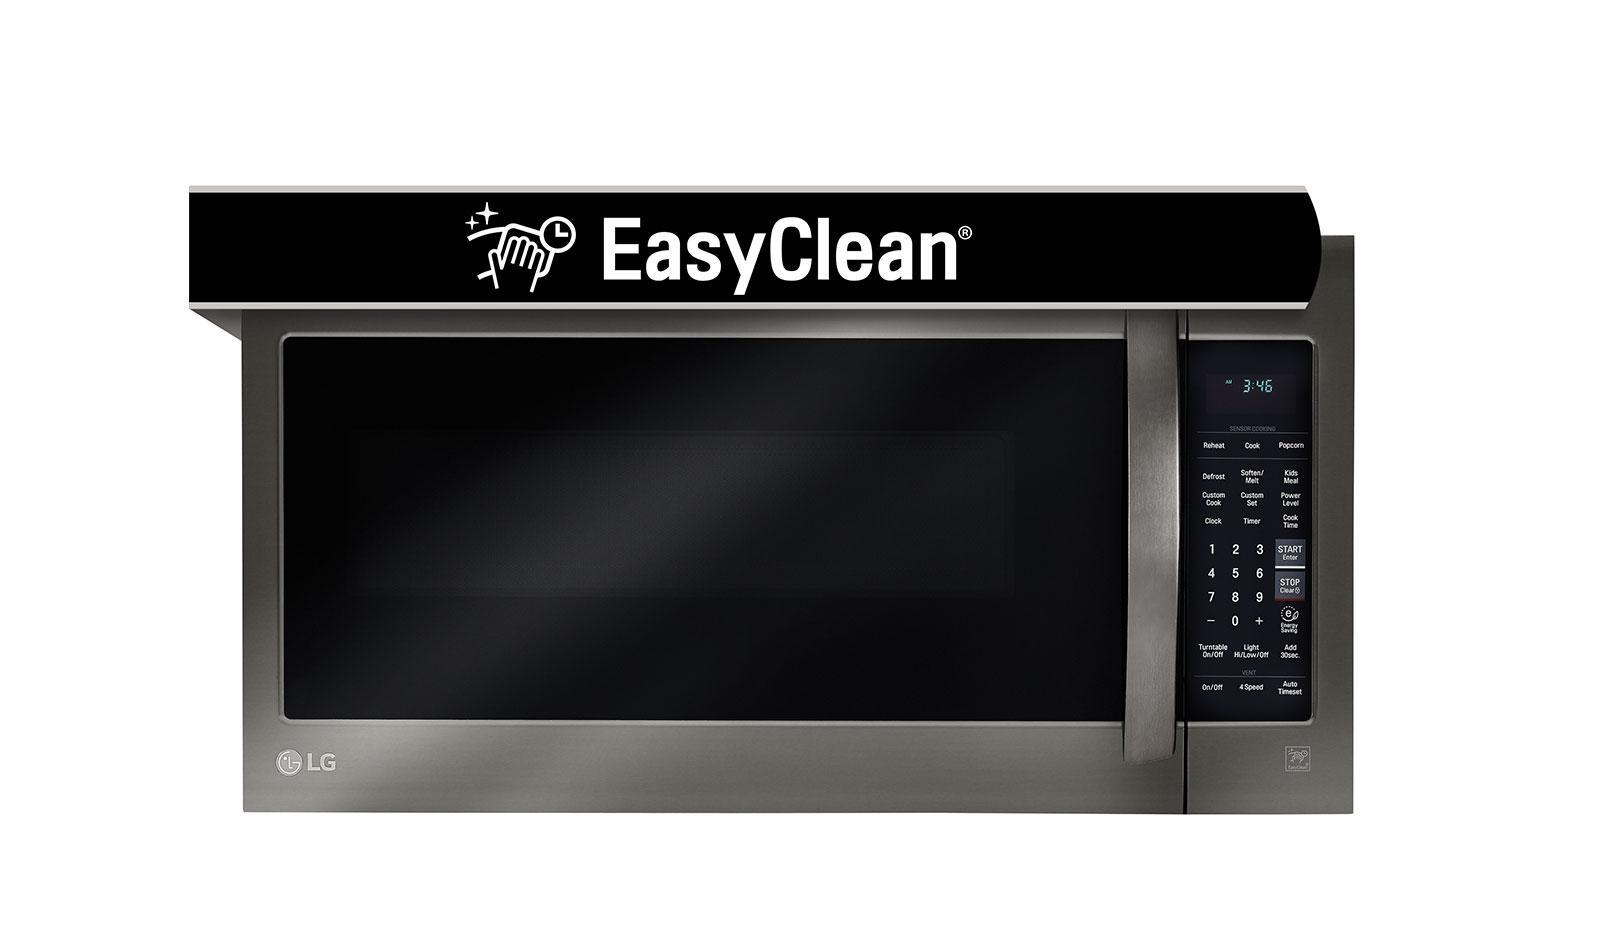 LG 2.0 cu. ft. Over-the-Range Microwave Oven With EasyClean®